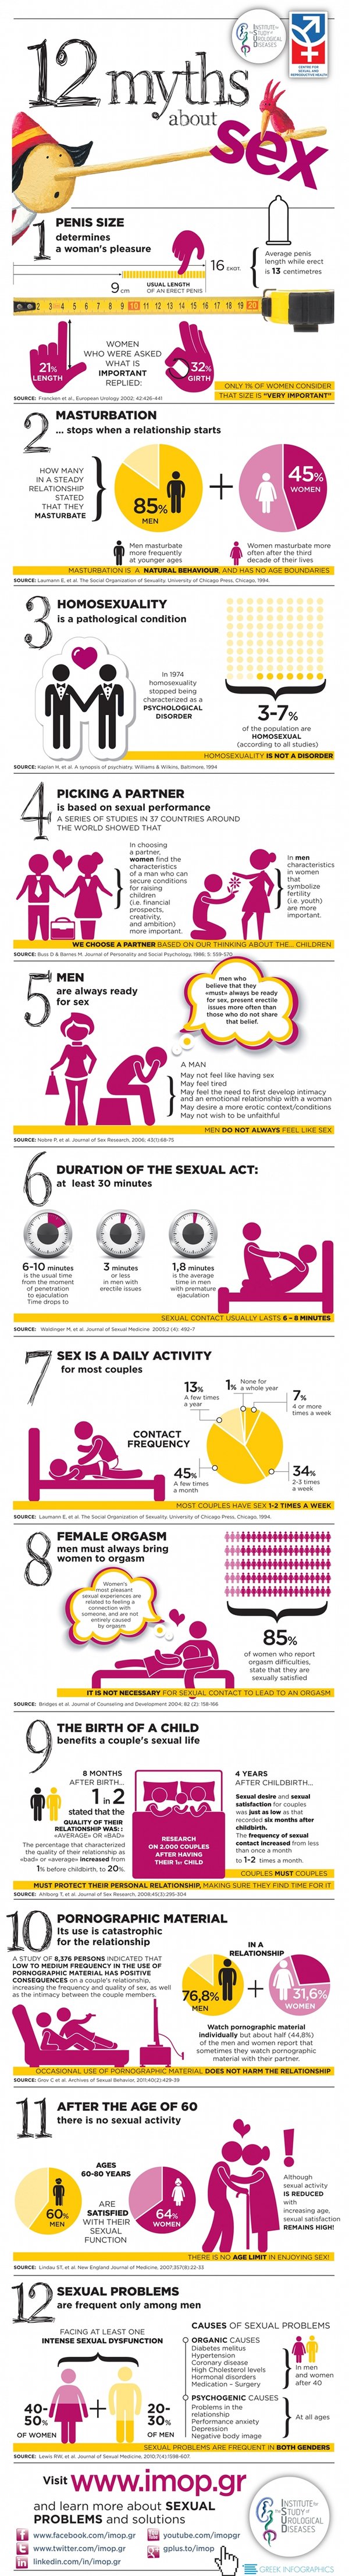 12 Myths About Sex [Infographic]